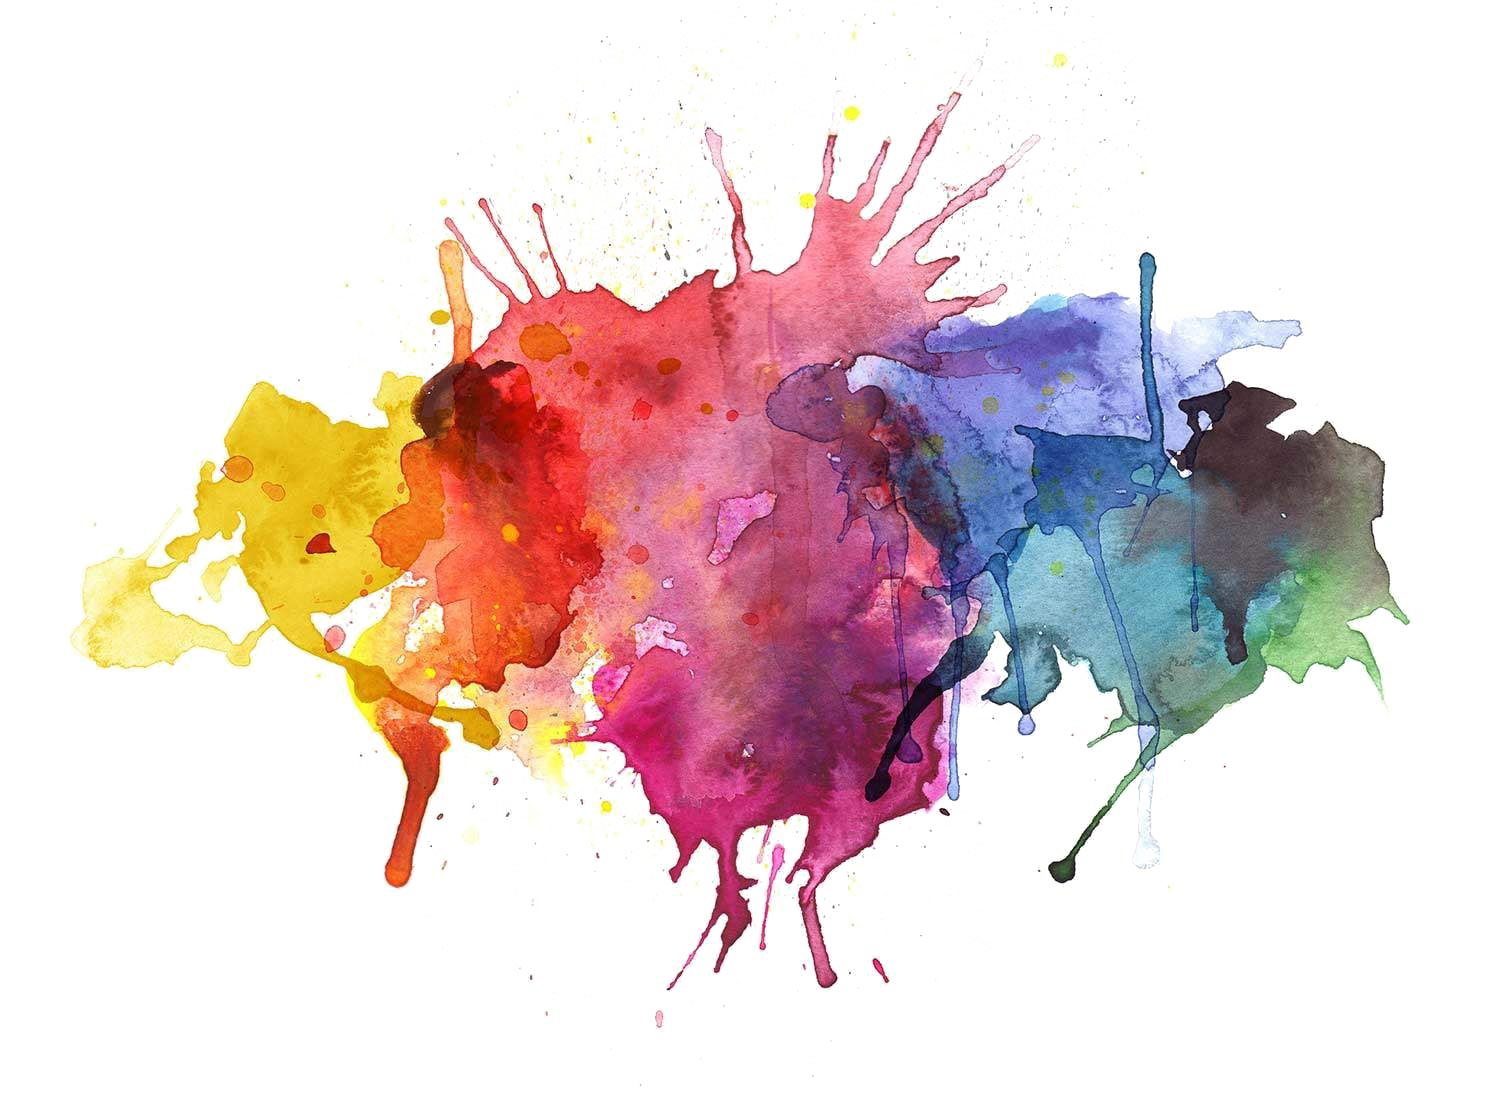 Abstract Watercolor Images Free Transparent Image HD PNG Image